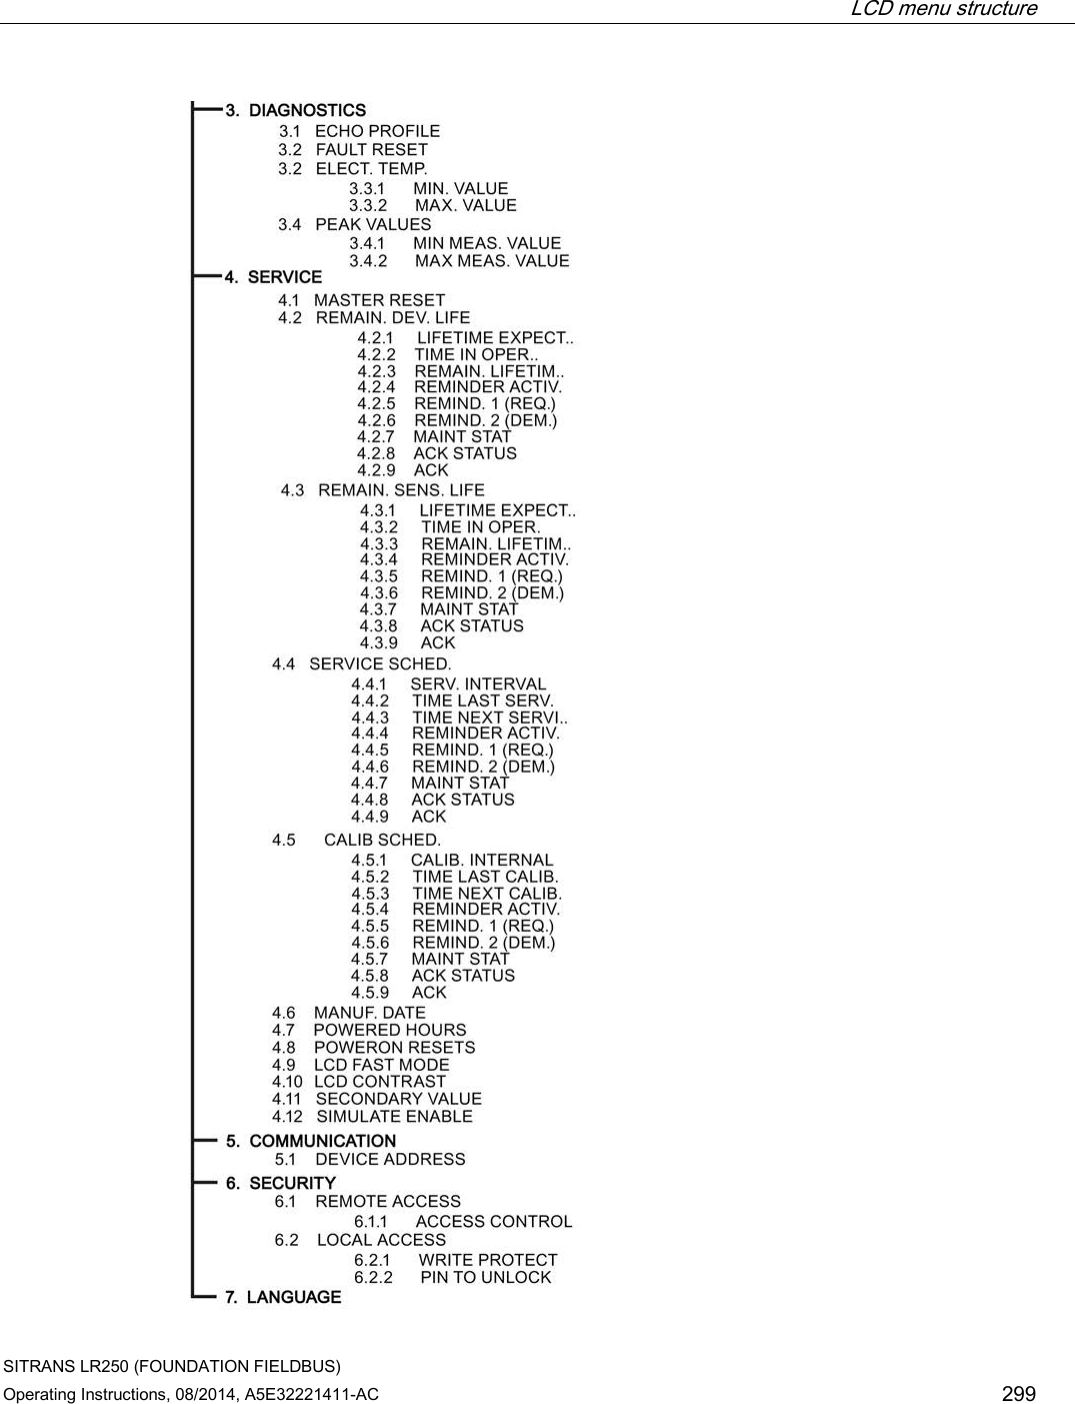  LCD menu structure   SITRANS LR250 (FOUNDATION FIELDBUS) Operating Instructions, 08/2014, A5E32221411-AC 299  